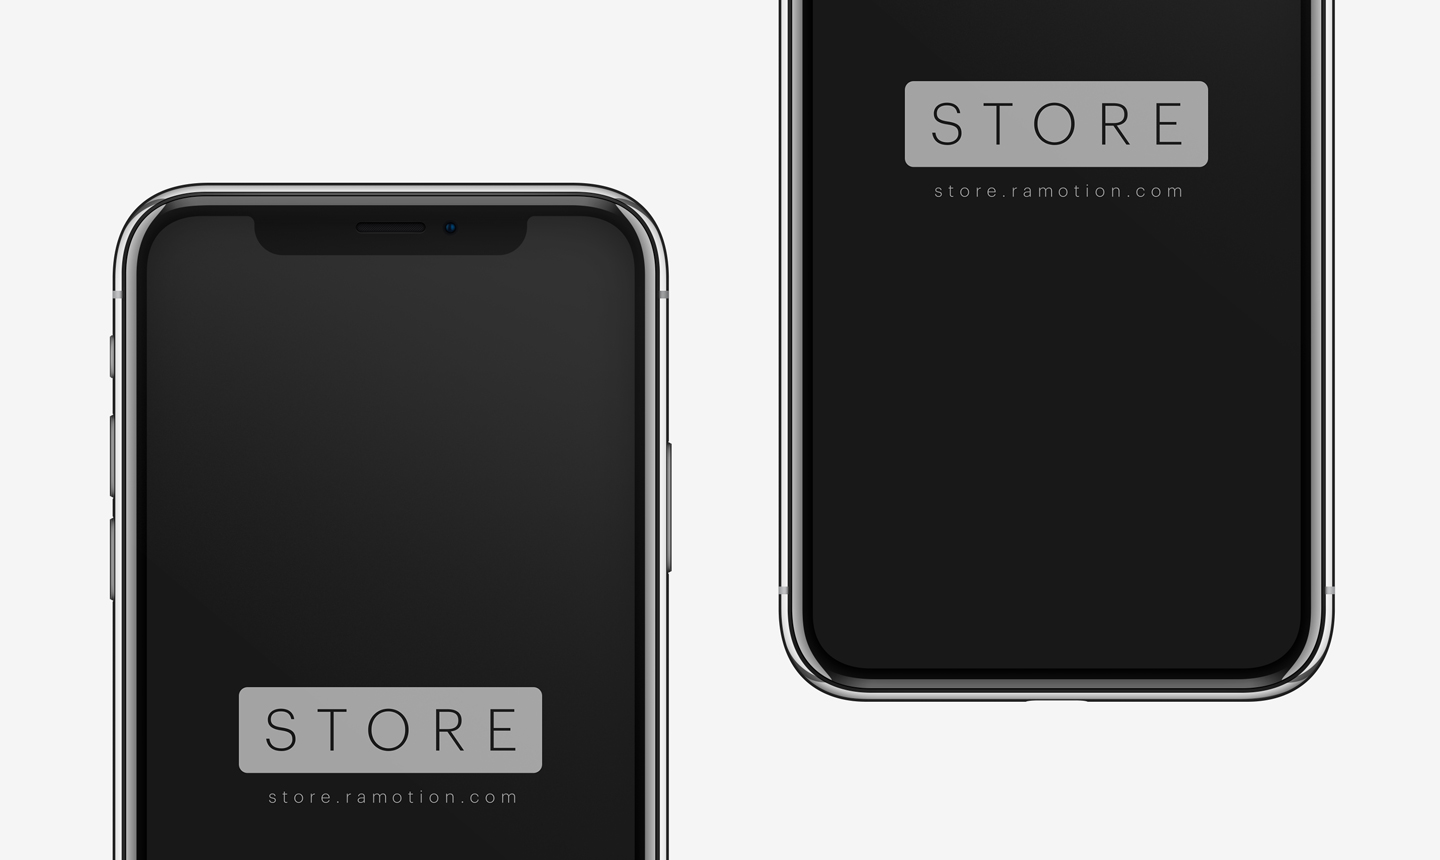 Dribbble - iphone-x-mockup-template-frontal-black-psd-free.jpg by Ramotion